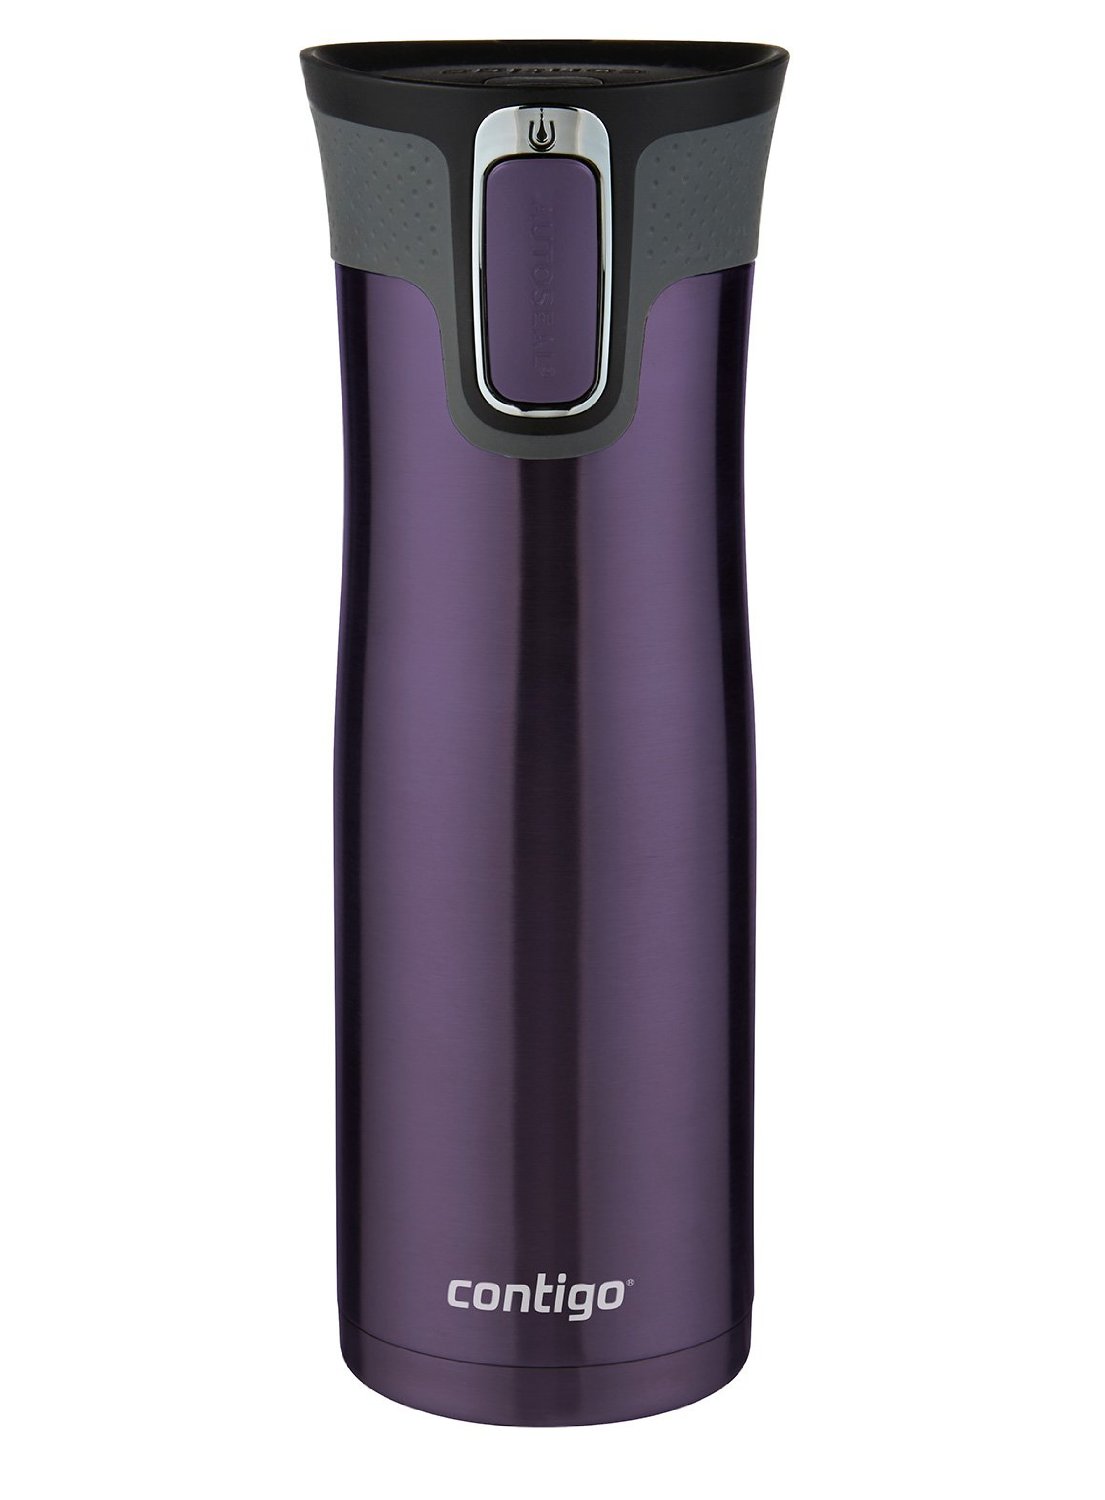 Contigo 70120 Autoseal West Loop Stainless Travel Mug With Easy-clean Lid